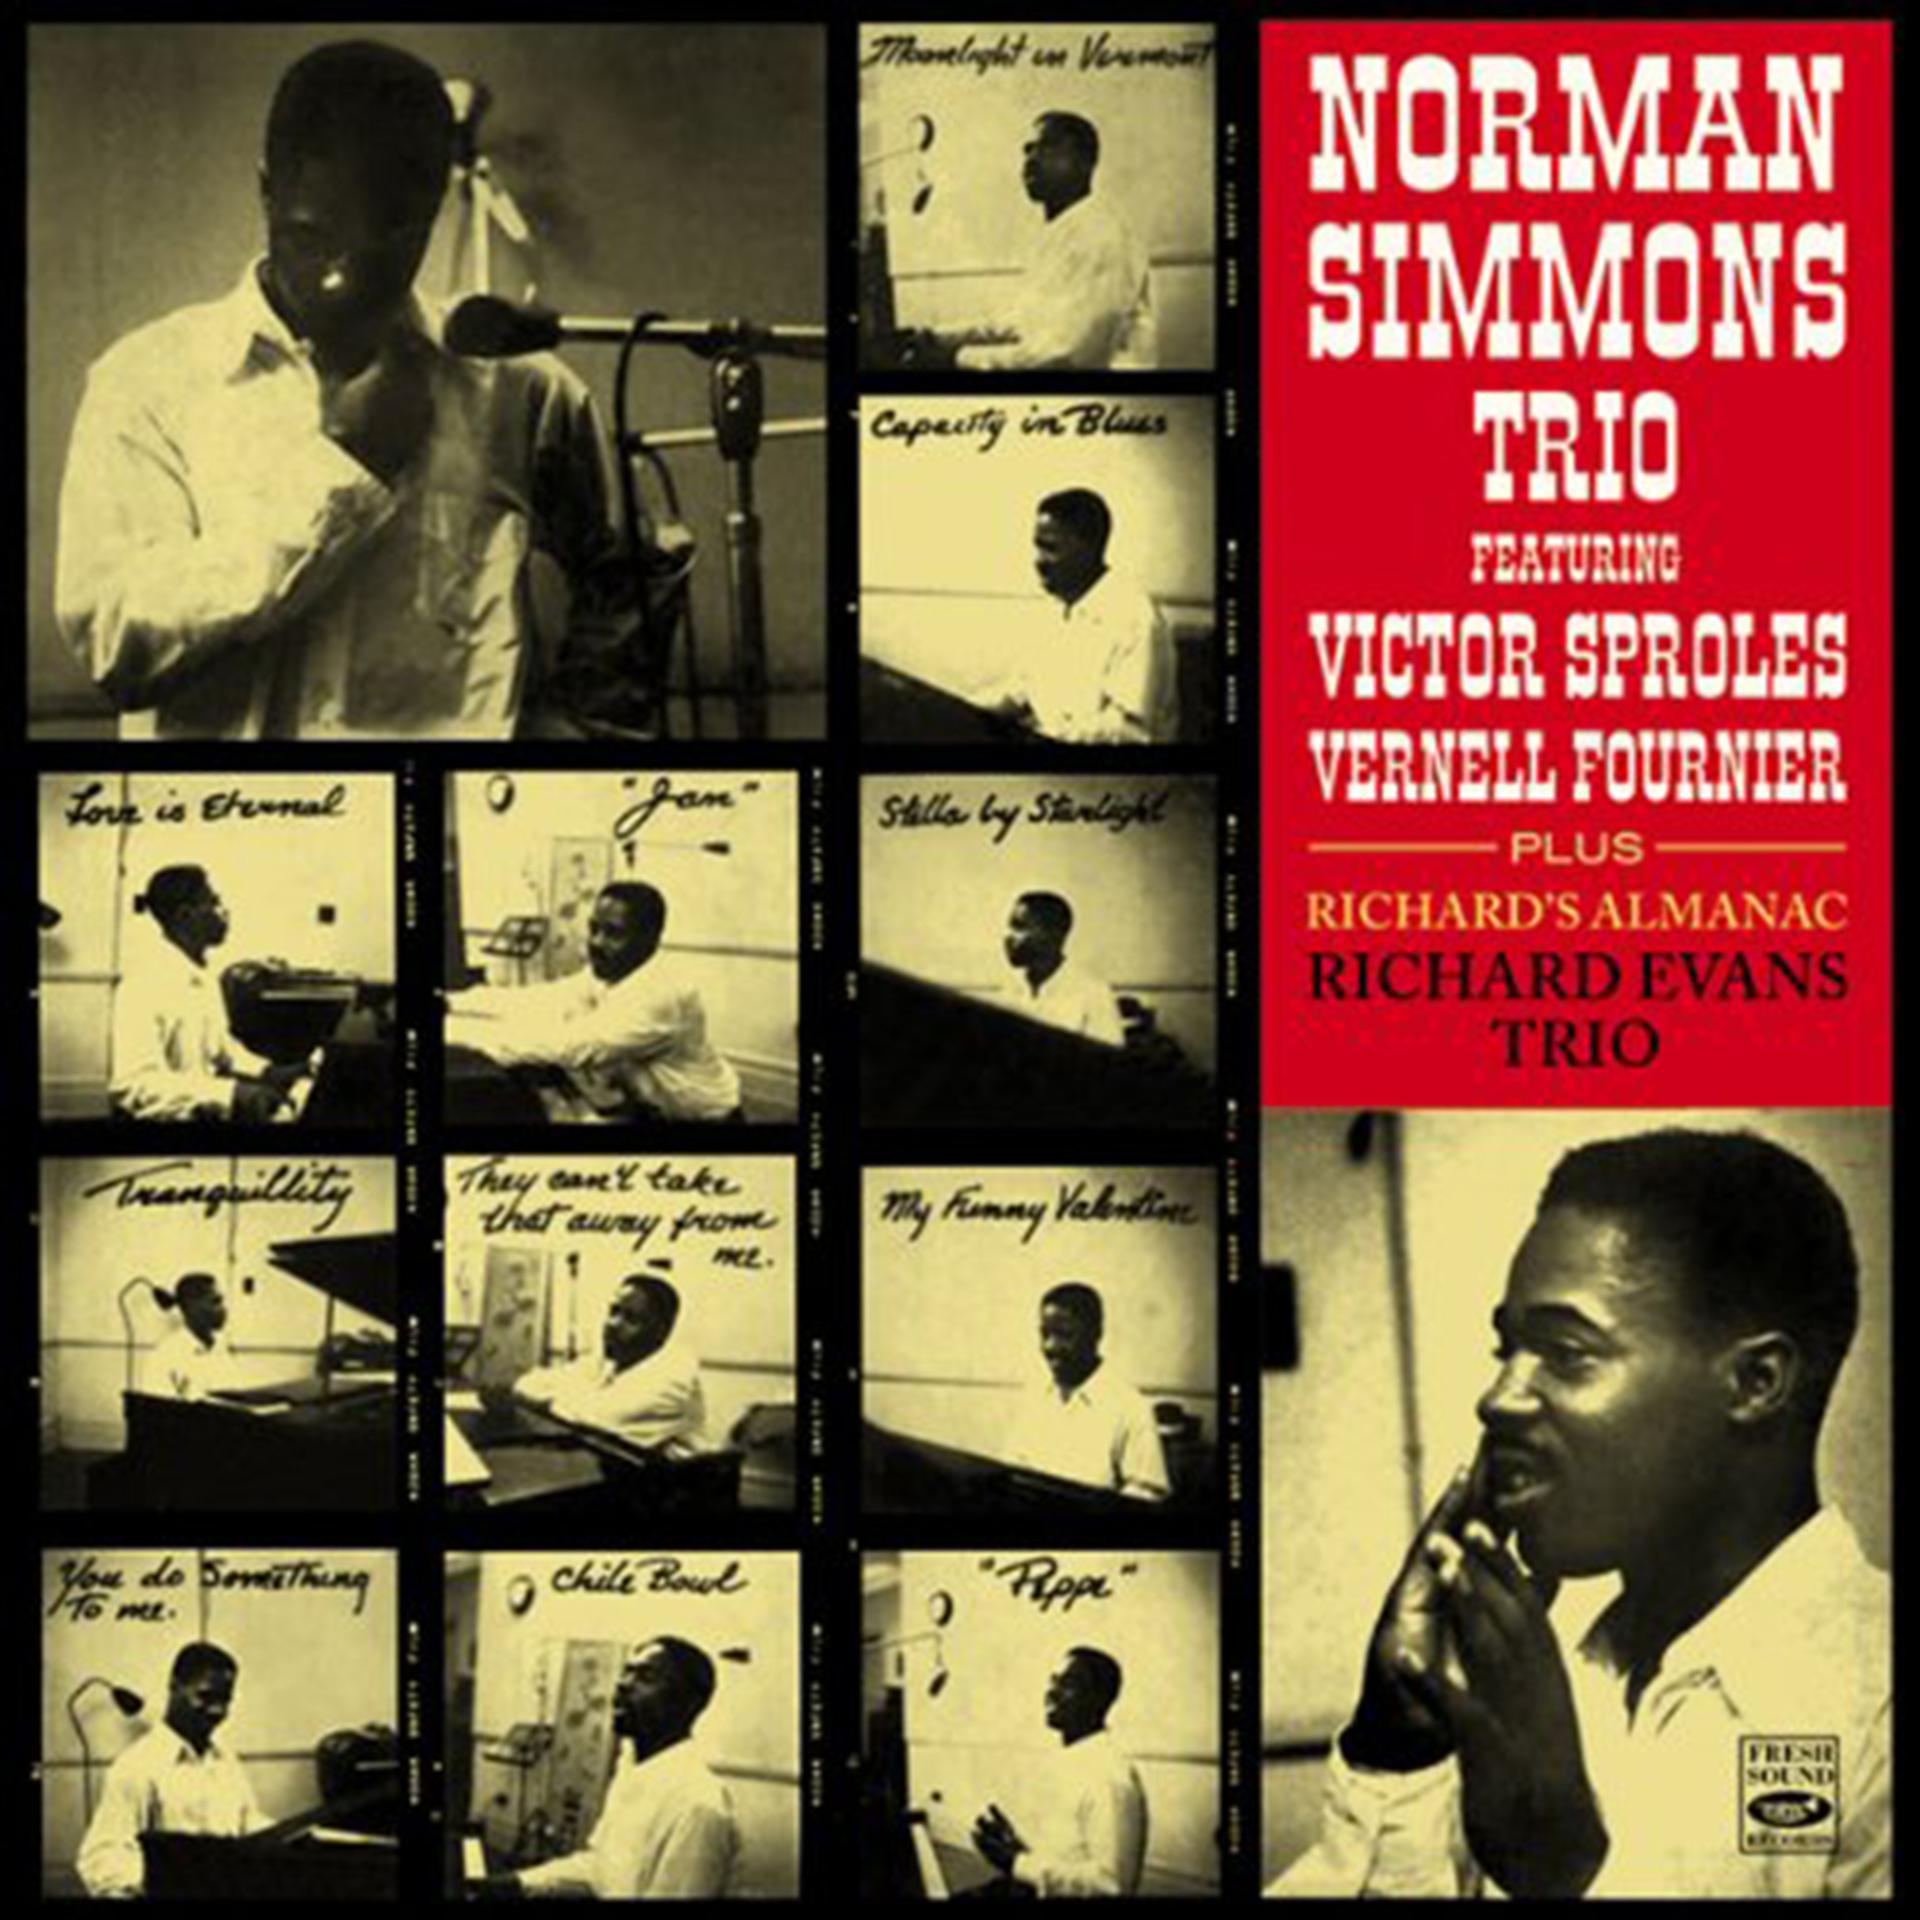 Постер альбома Norman Simmons Trio Featuring Victor Sproles and Vernell Fournier, Plus Richard Evans Trio "Richard's Almanac" With Jack Wilson and Robert Barry